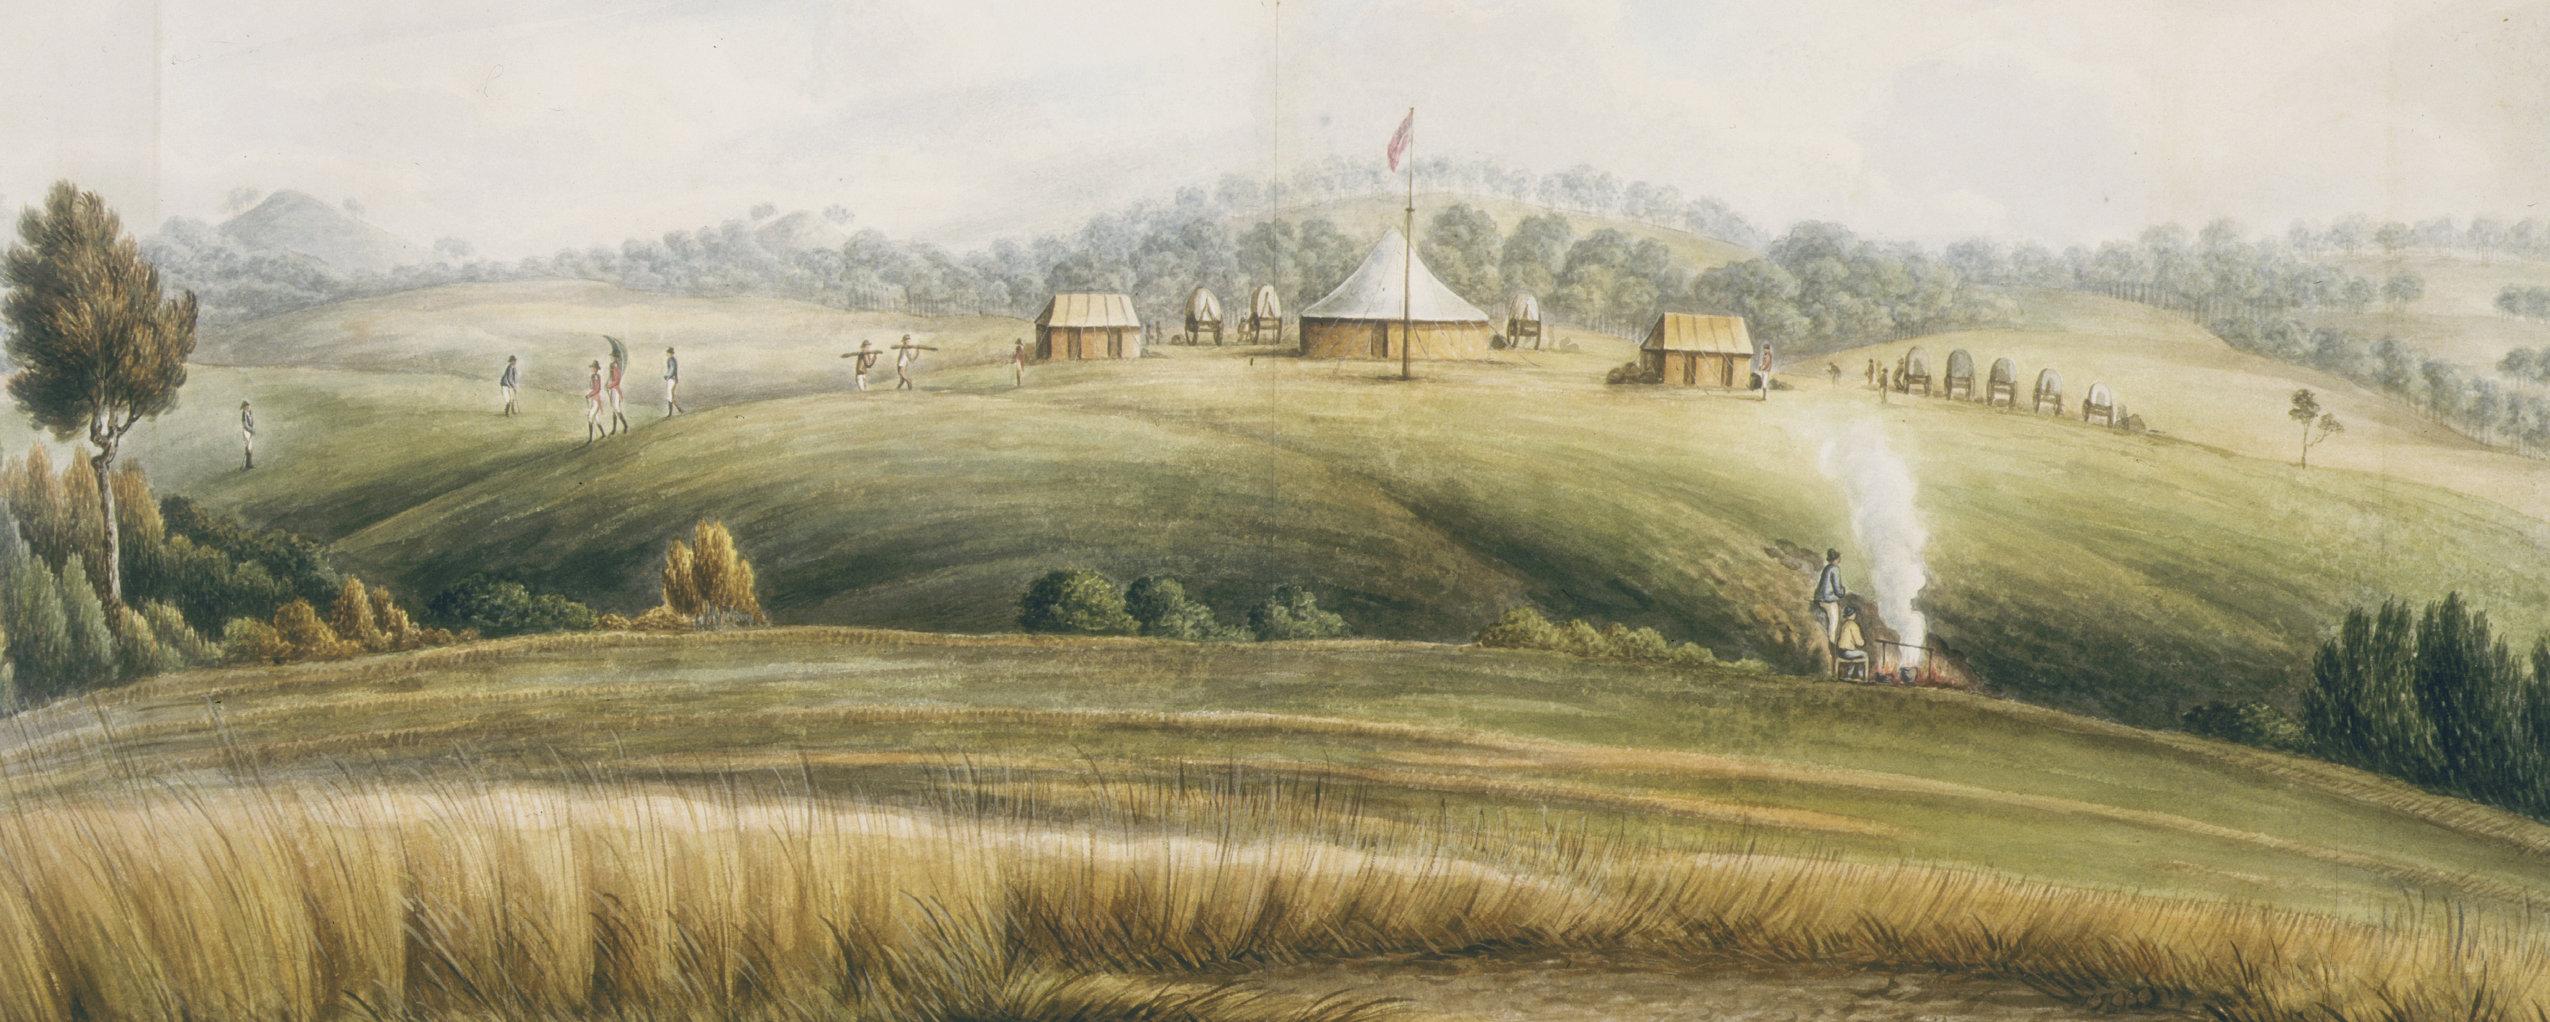 1815 Lewin painting